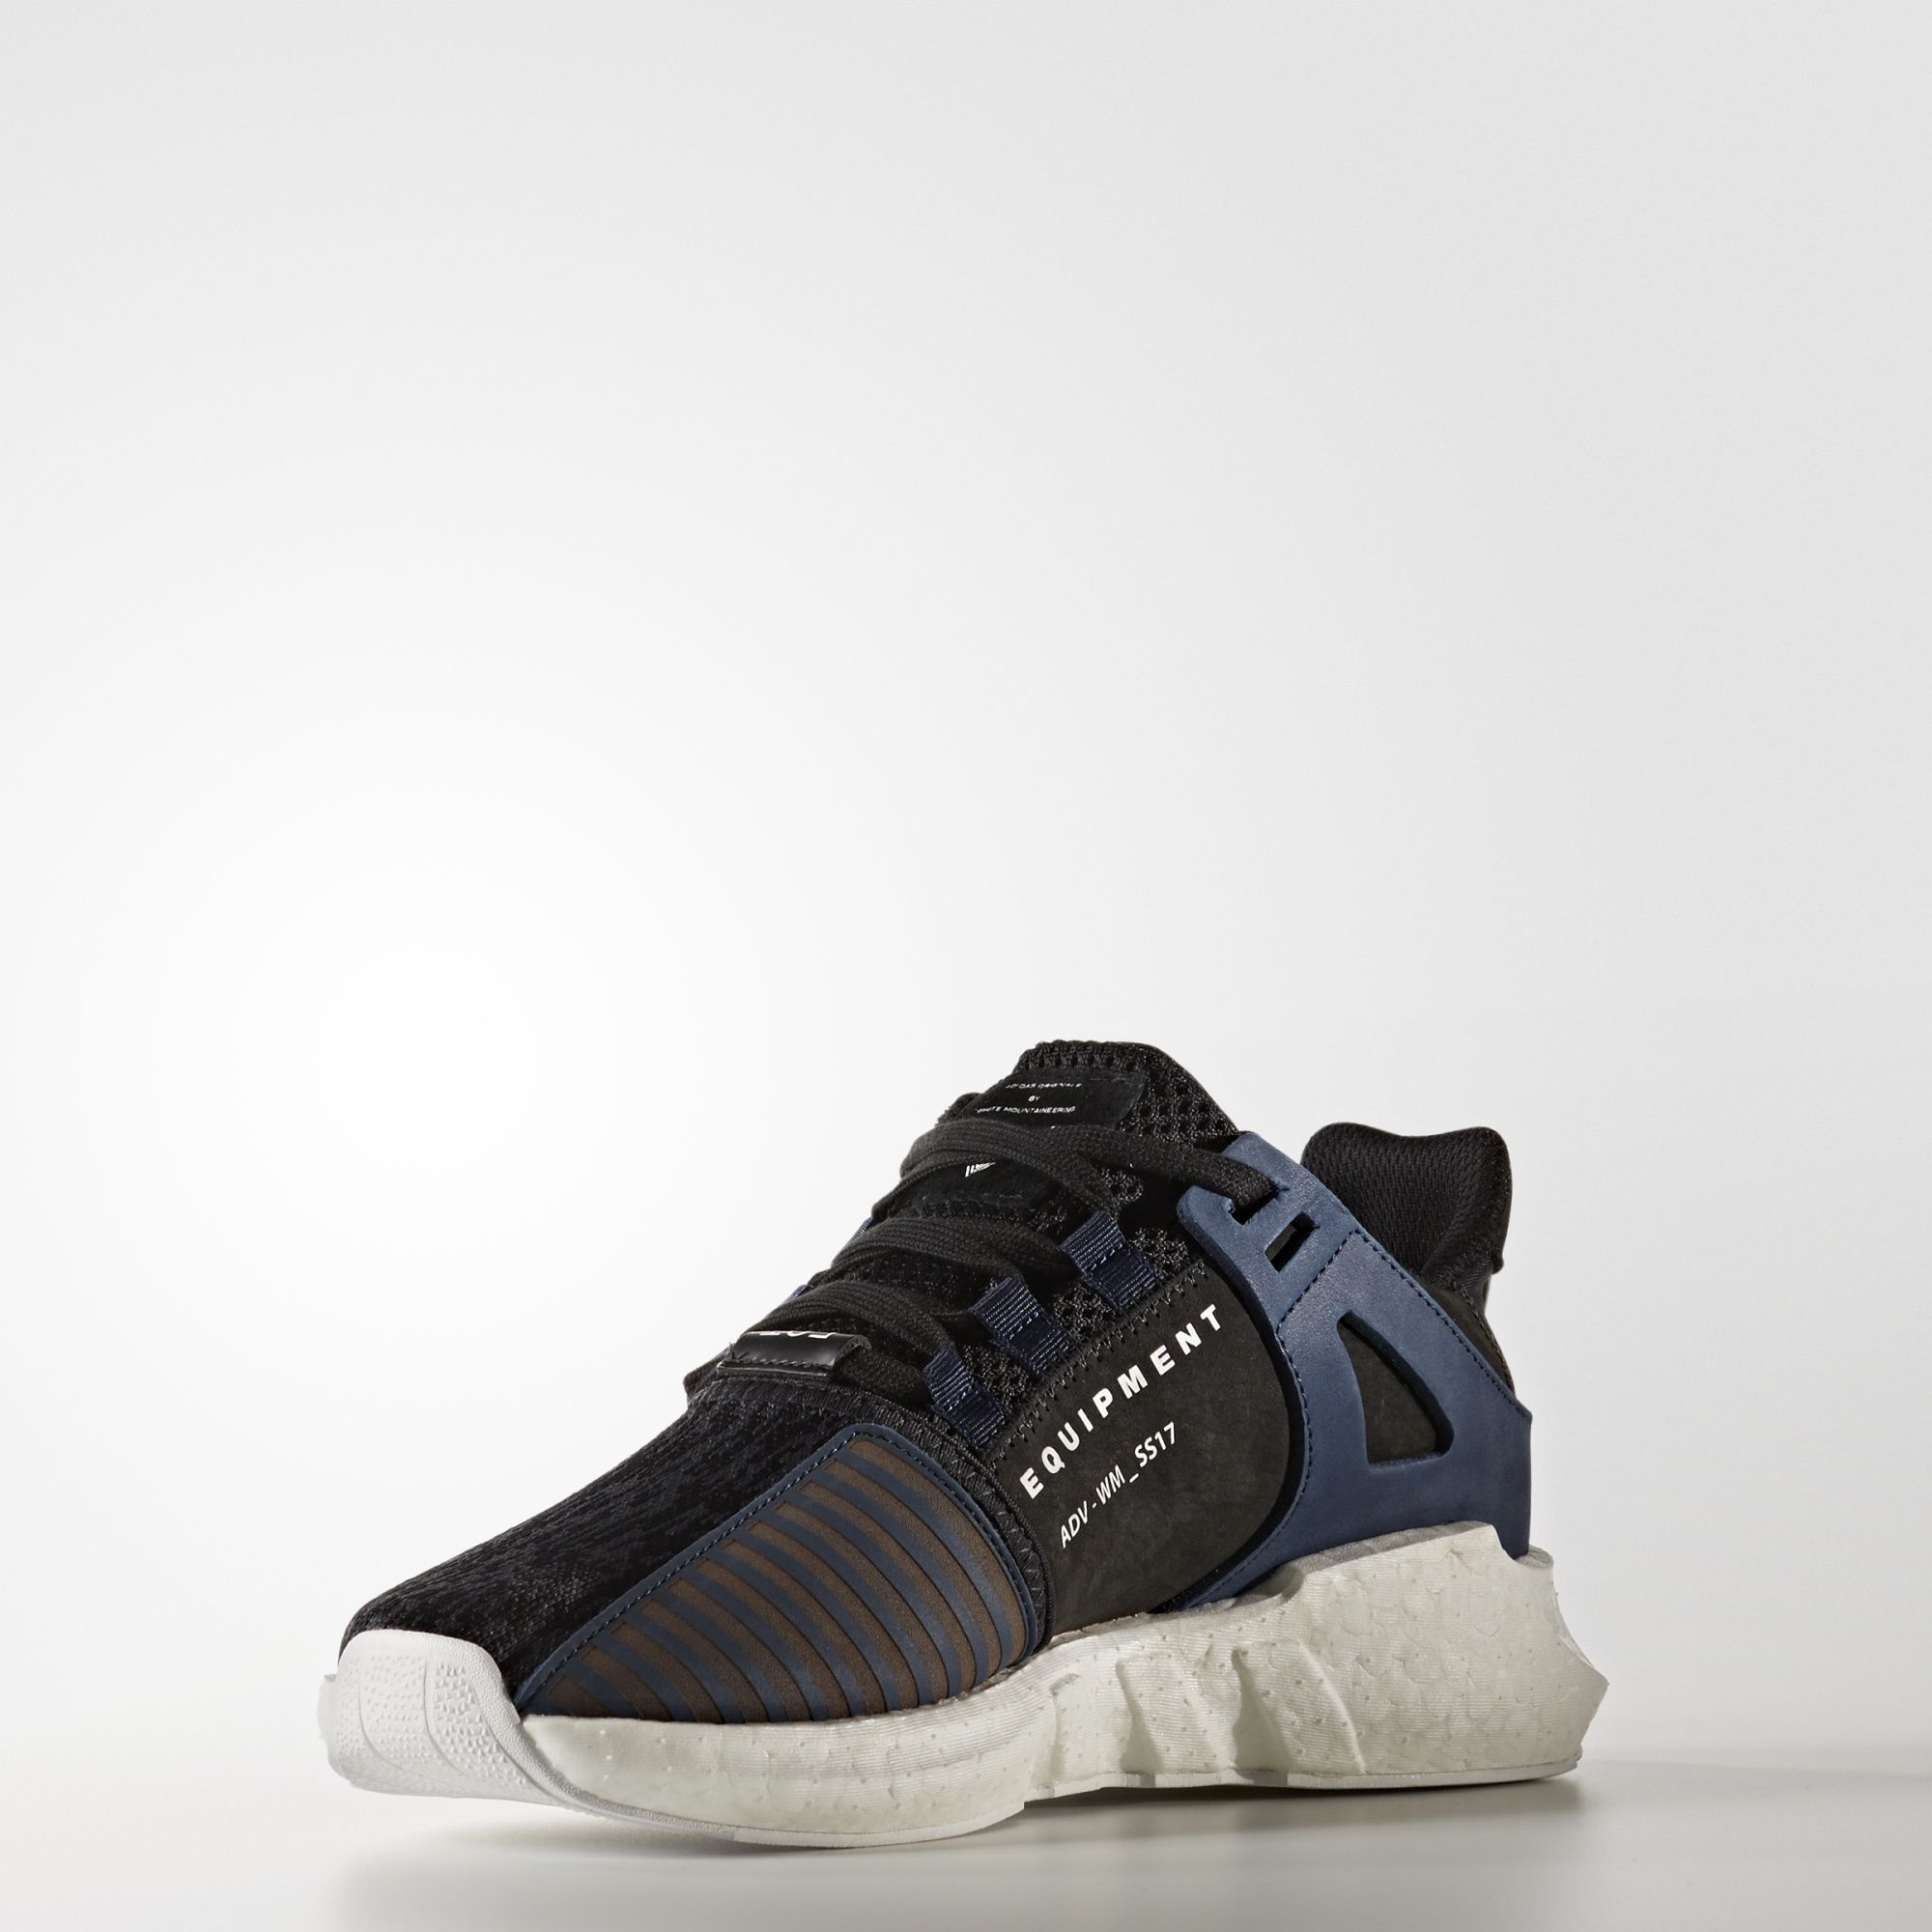 adidas-eqt-support-future-boost-x-white-mountaineering-3